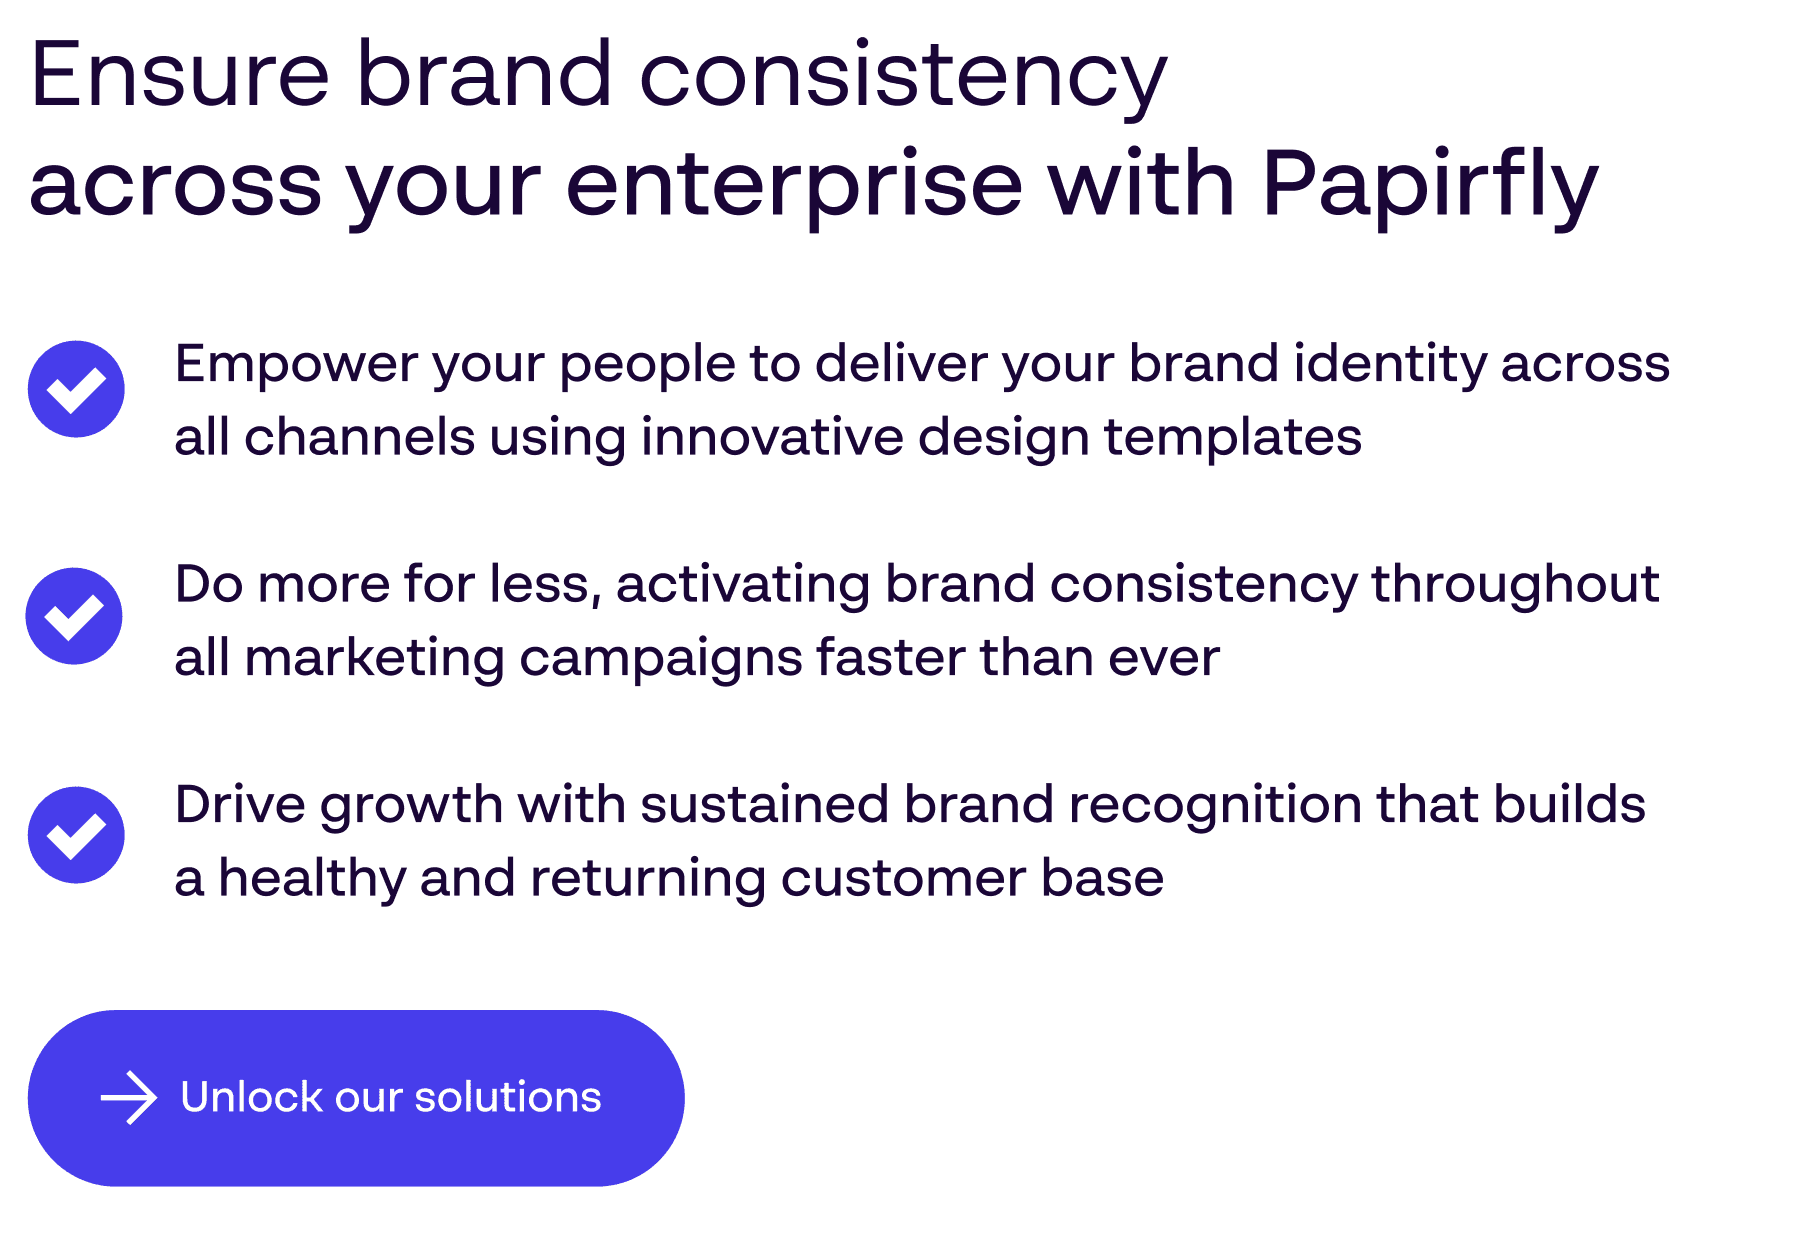 “Papirfly solutions and brand consistency services - CTA to brand management software platform”